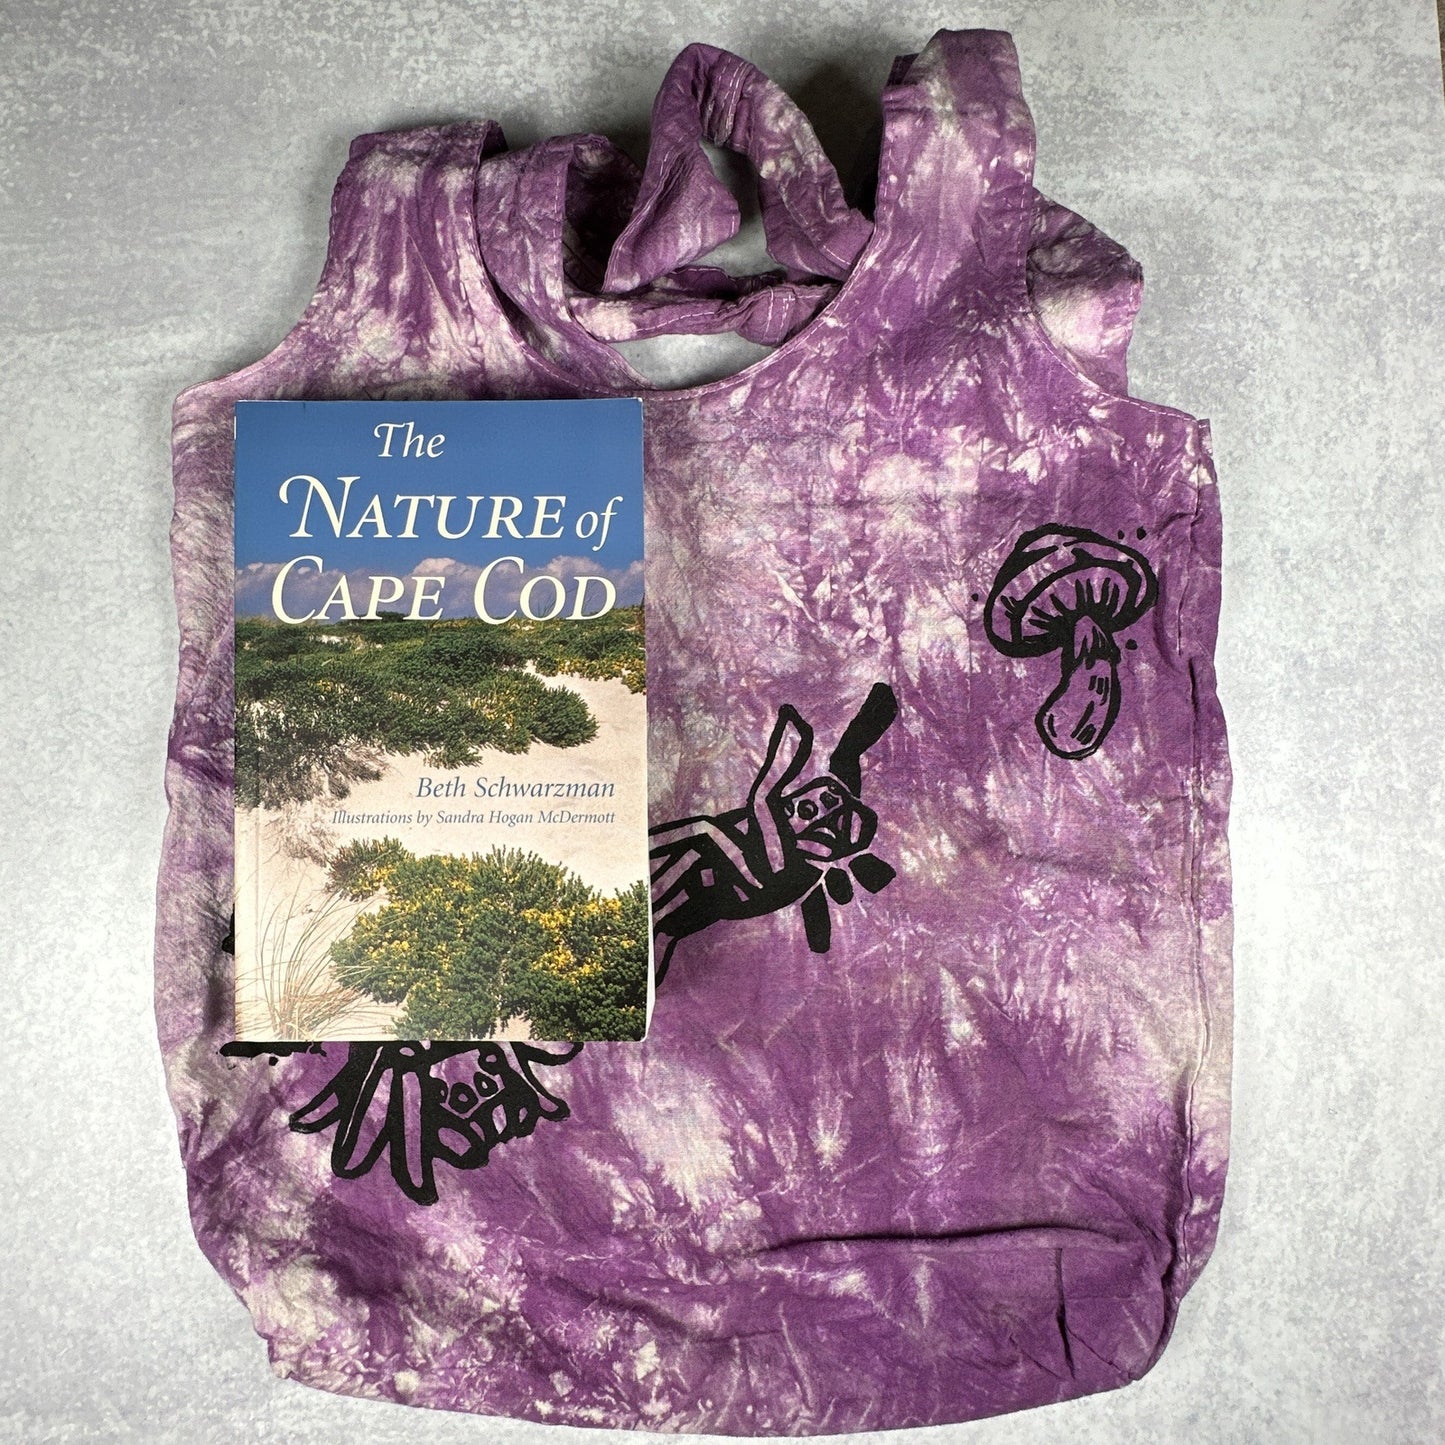 Purple Tie-dye JUMPing Spider and Mushroom Tote Bag - The Serpentry